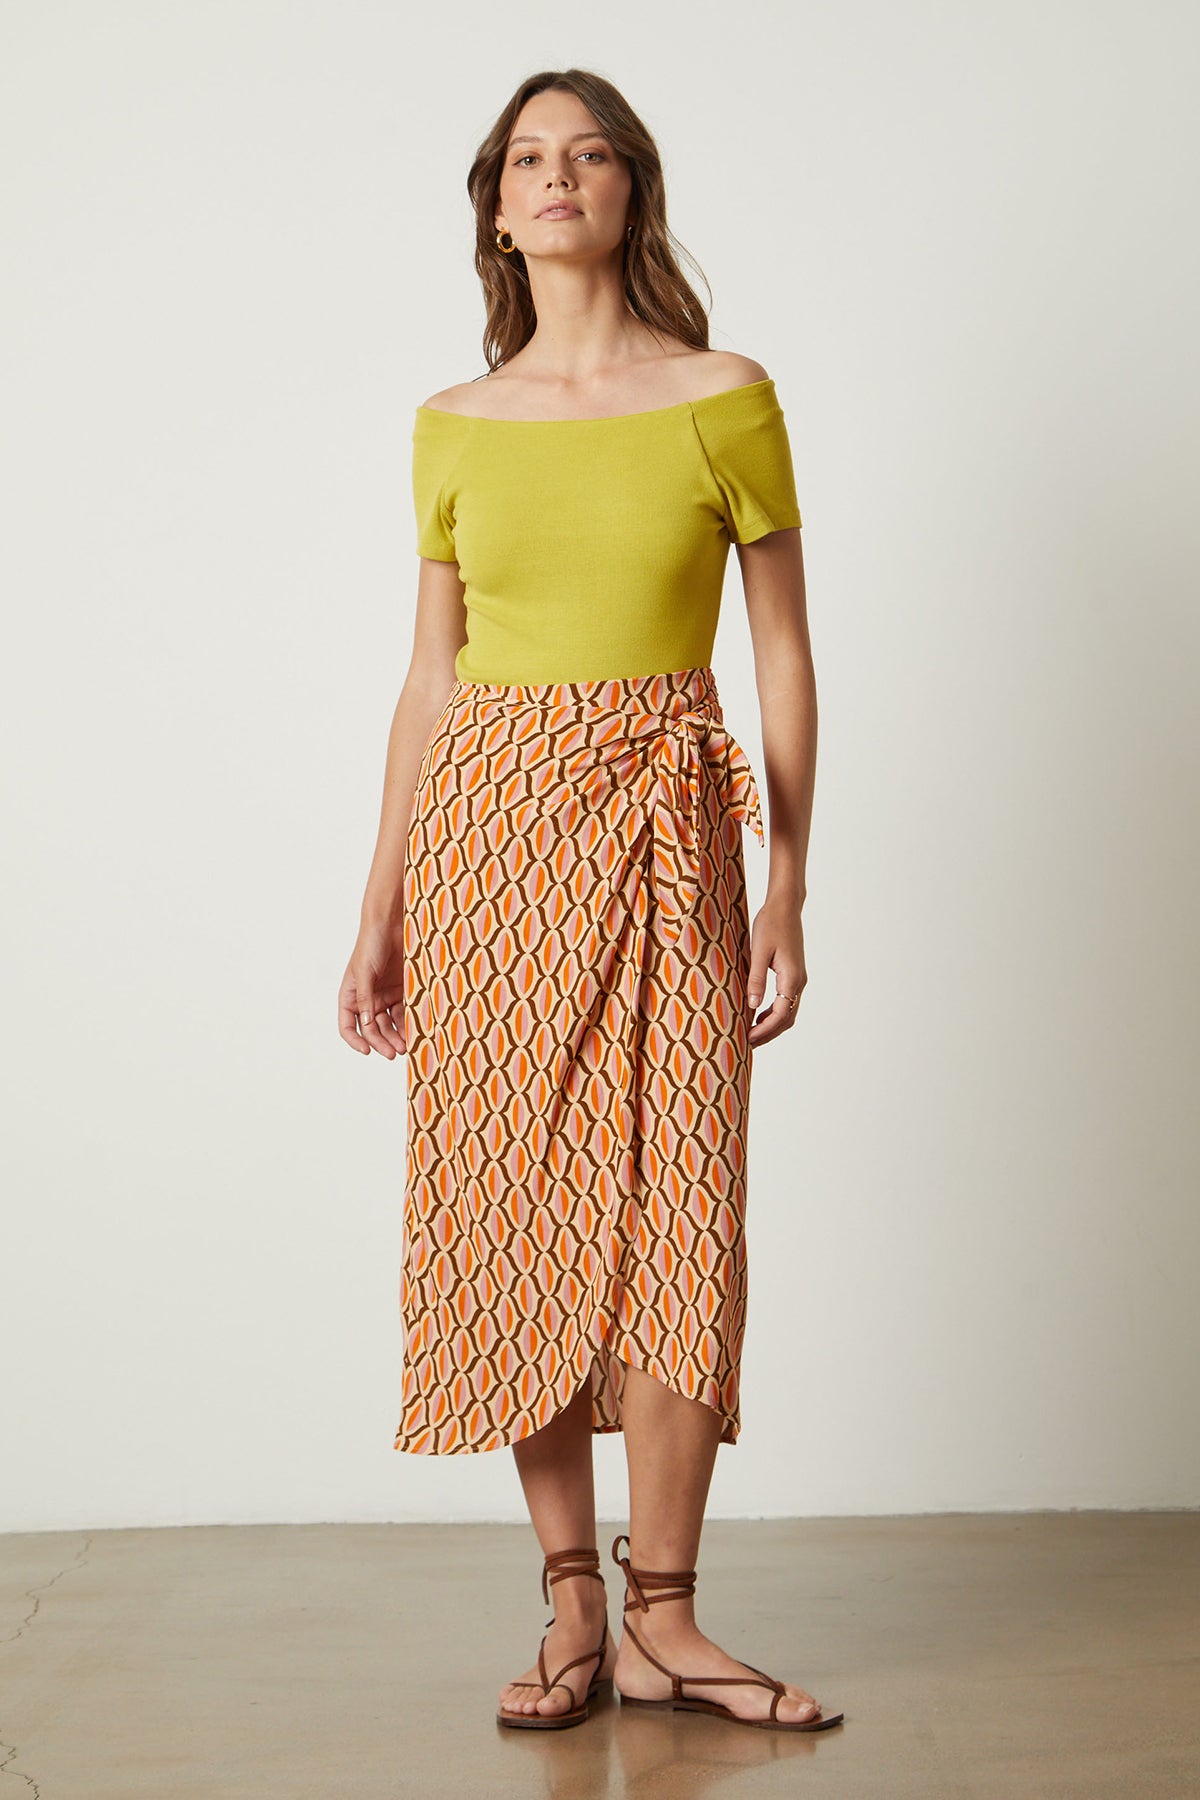   Alisha skirt in orange geometric pattern with Eloise body suit in sundance yellow with sandals full length front 